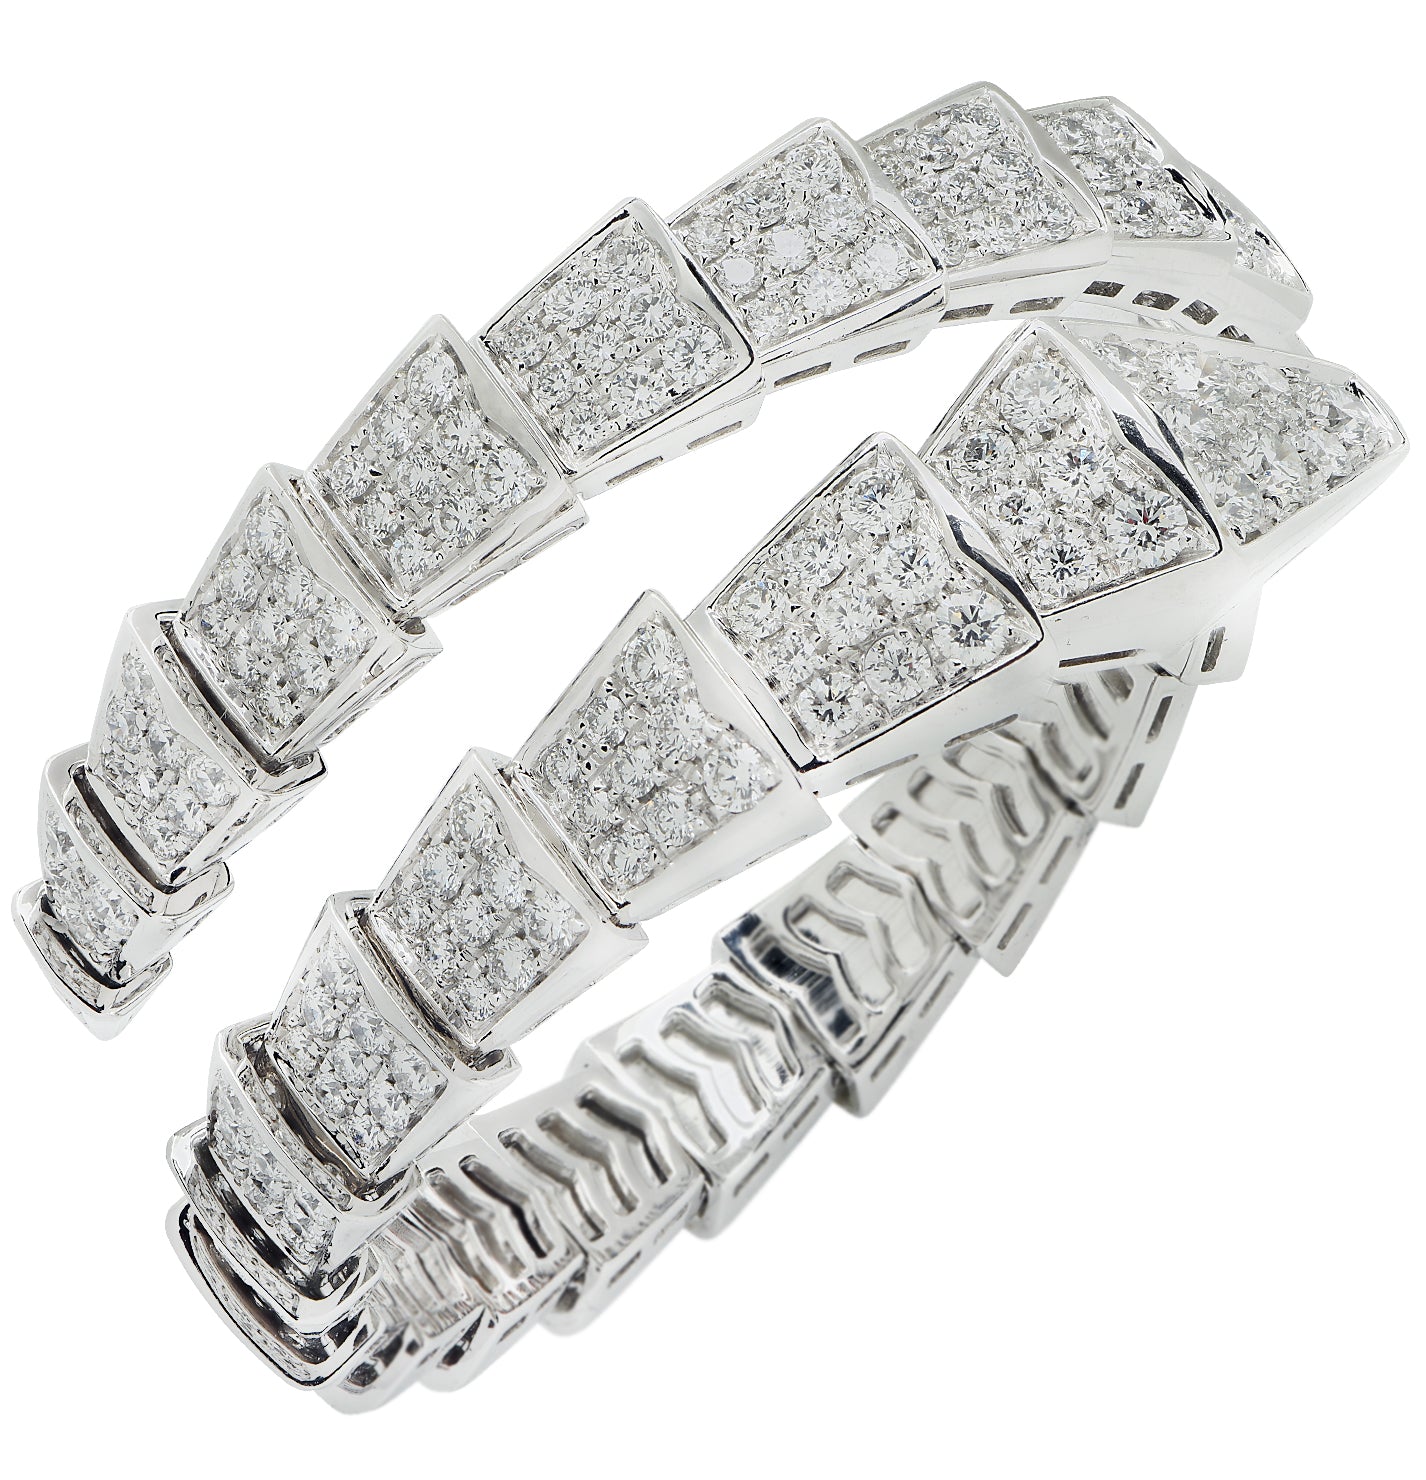 Bvlgari White Gold Serpenti Viper Bracelet Available For Immediate Sale At  Sotheby's